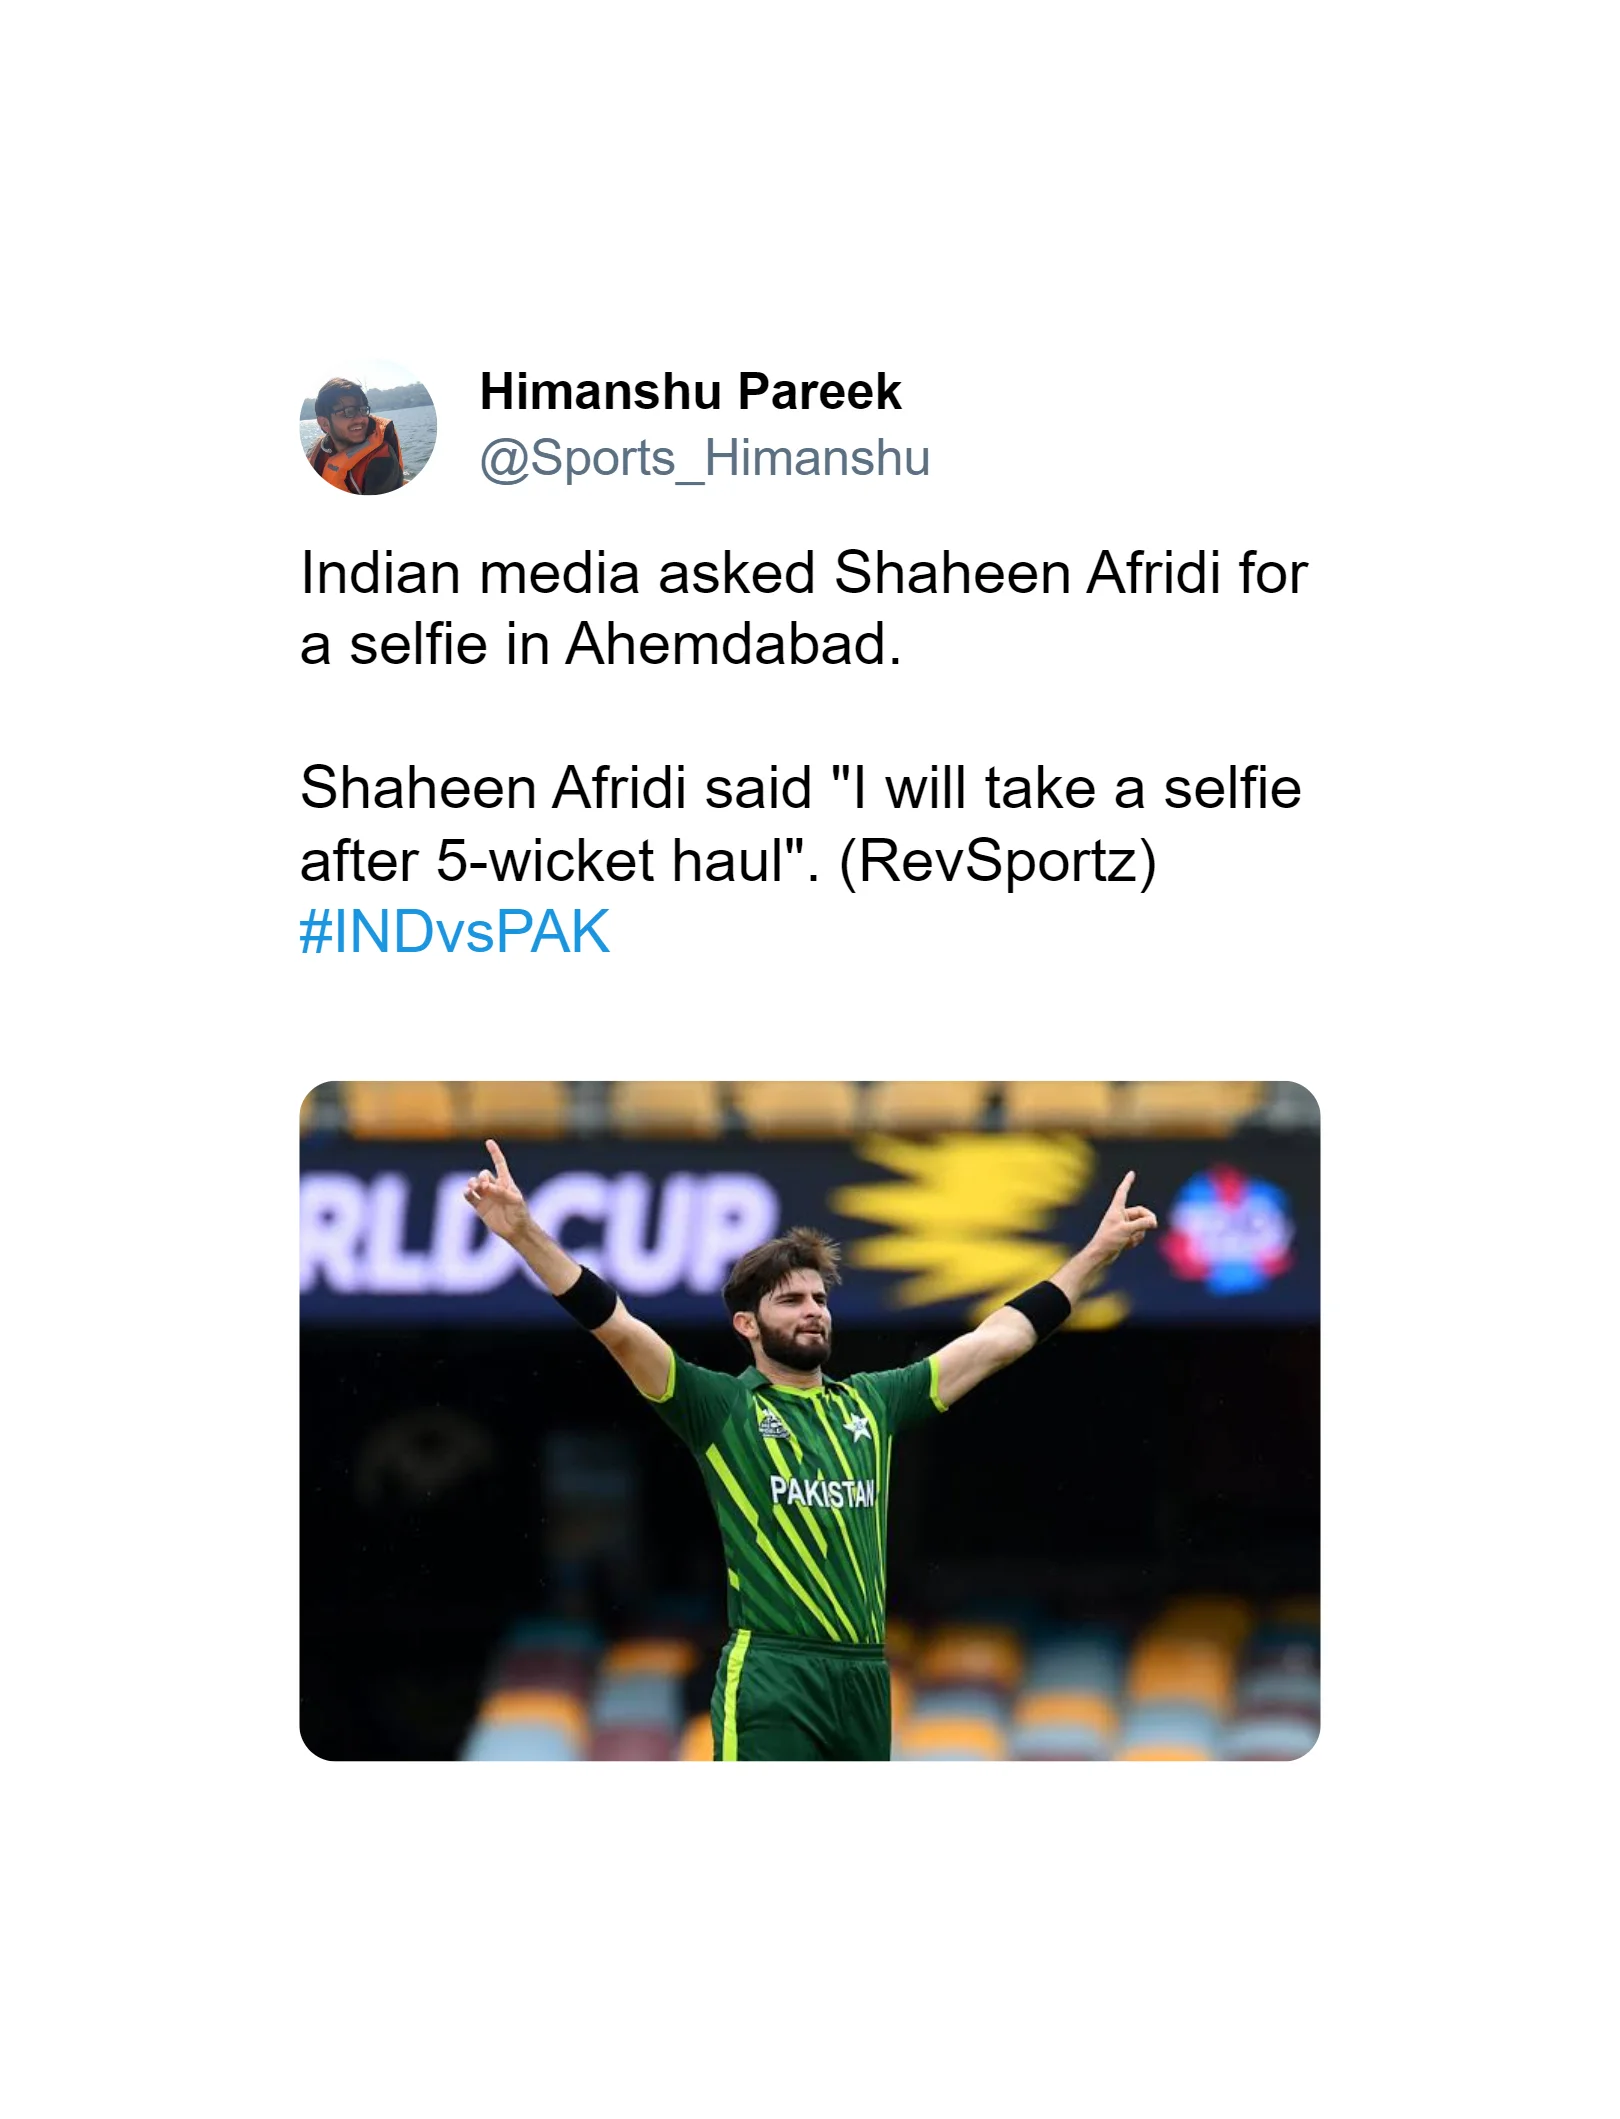 [IND vs PAK] Memes Galore As Shaheen Afridi Says That He Will Take Selfie With Media After 5-Wicket Haul